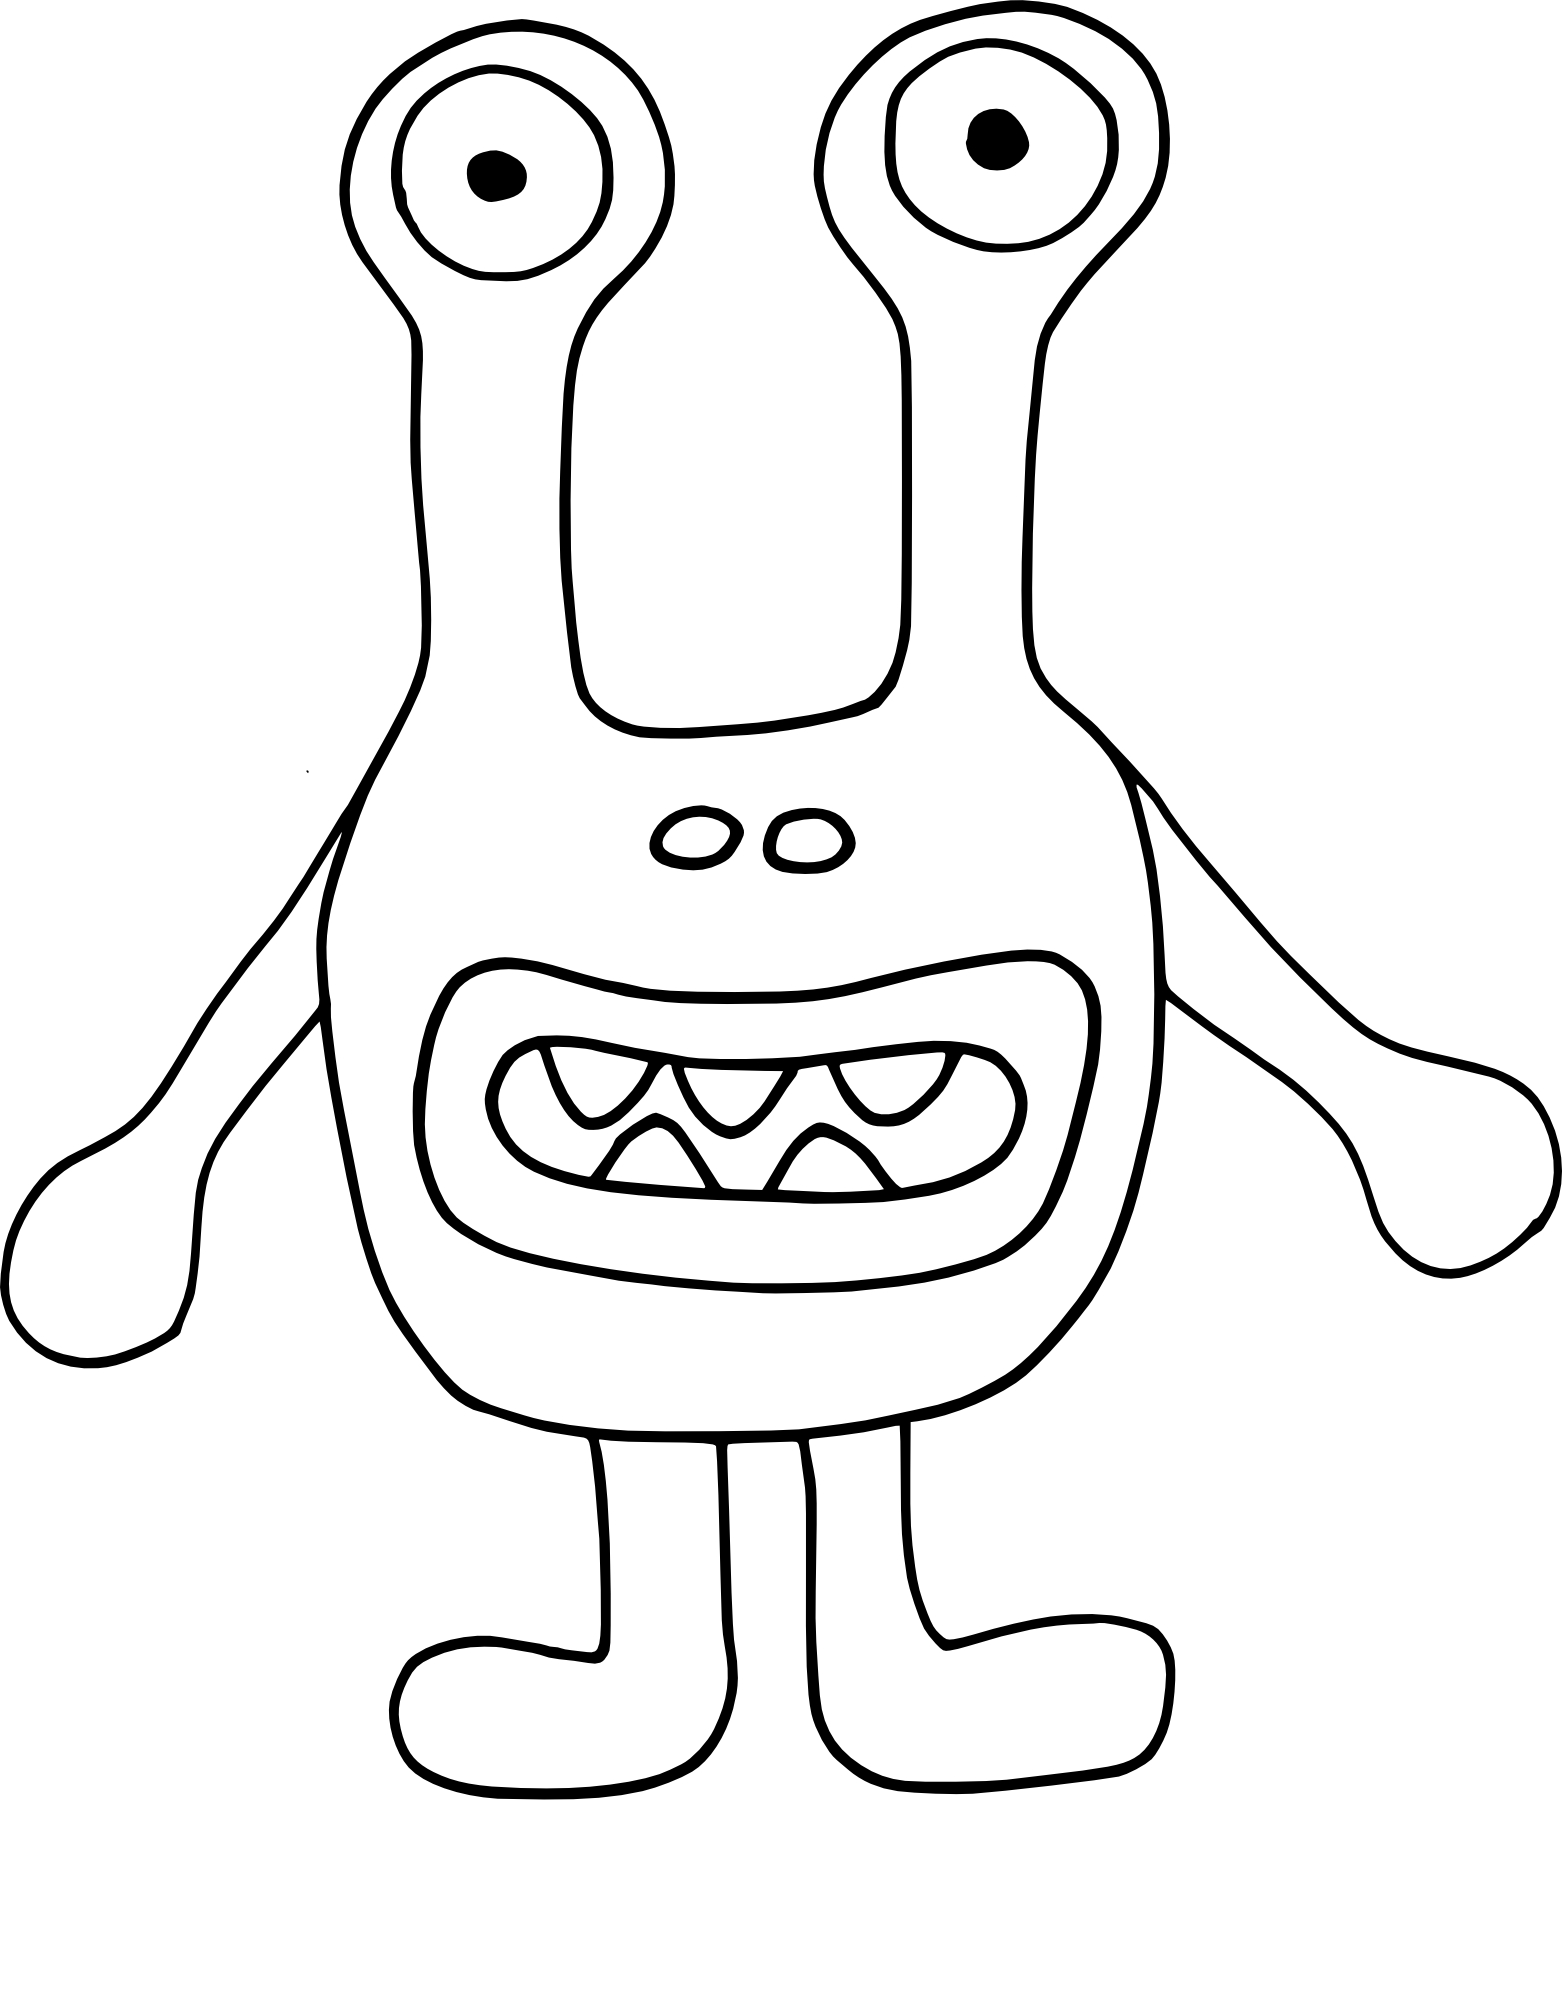 Weird Monster coloring page